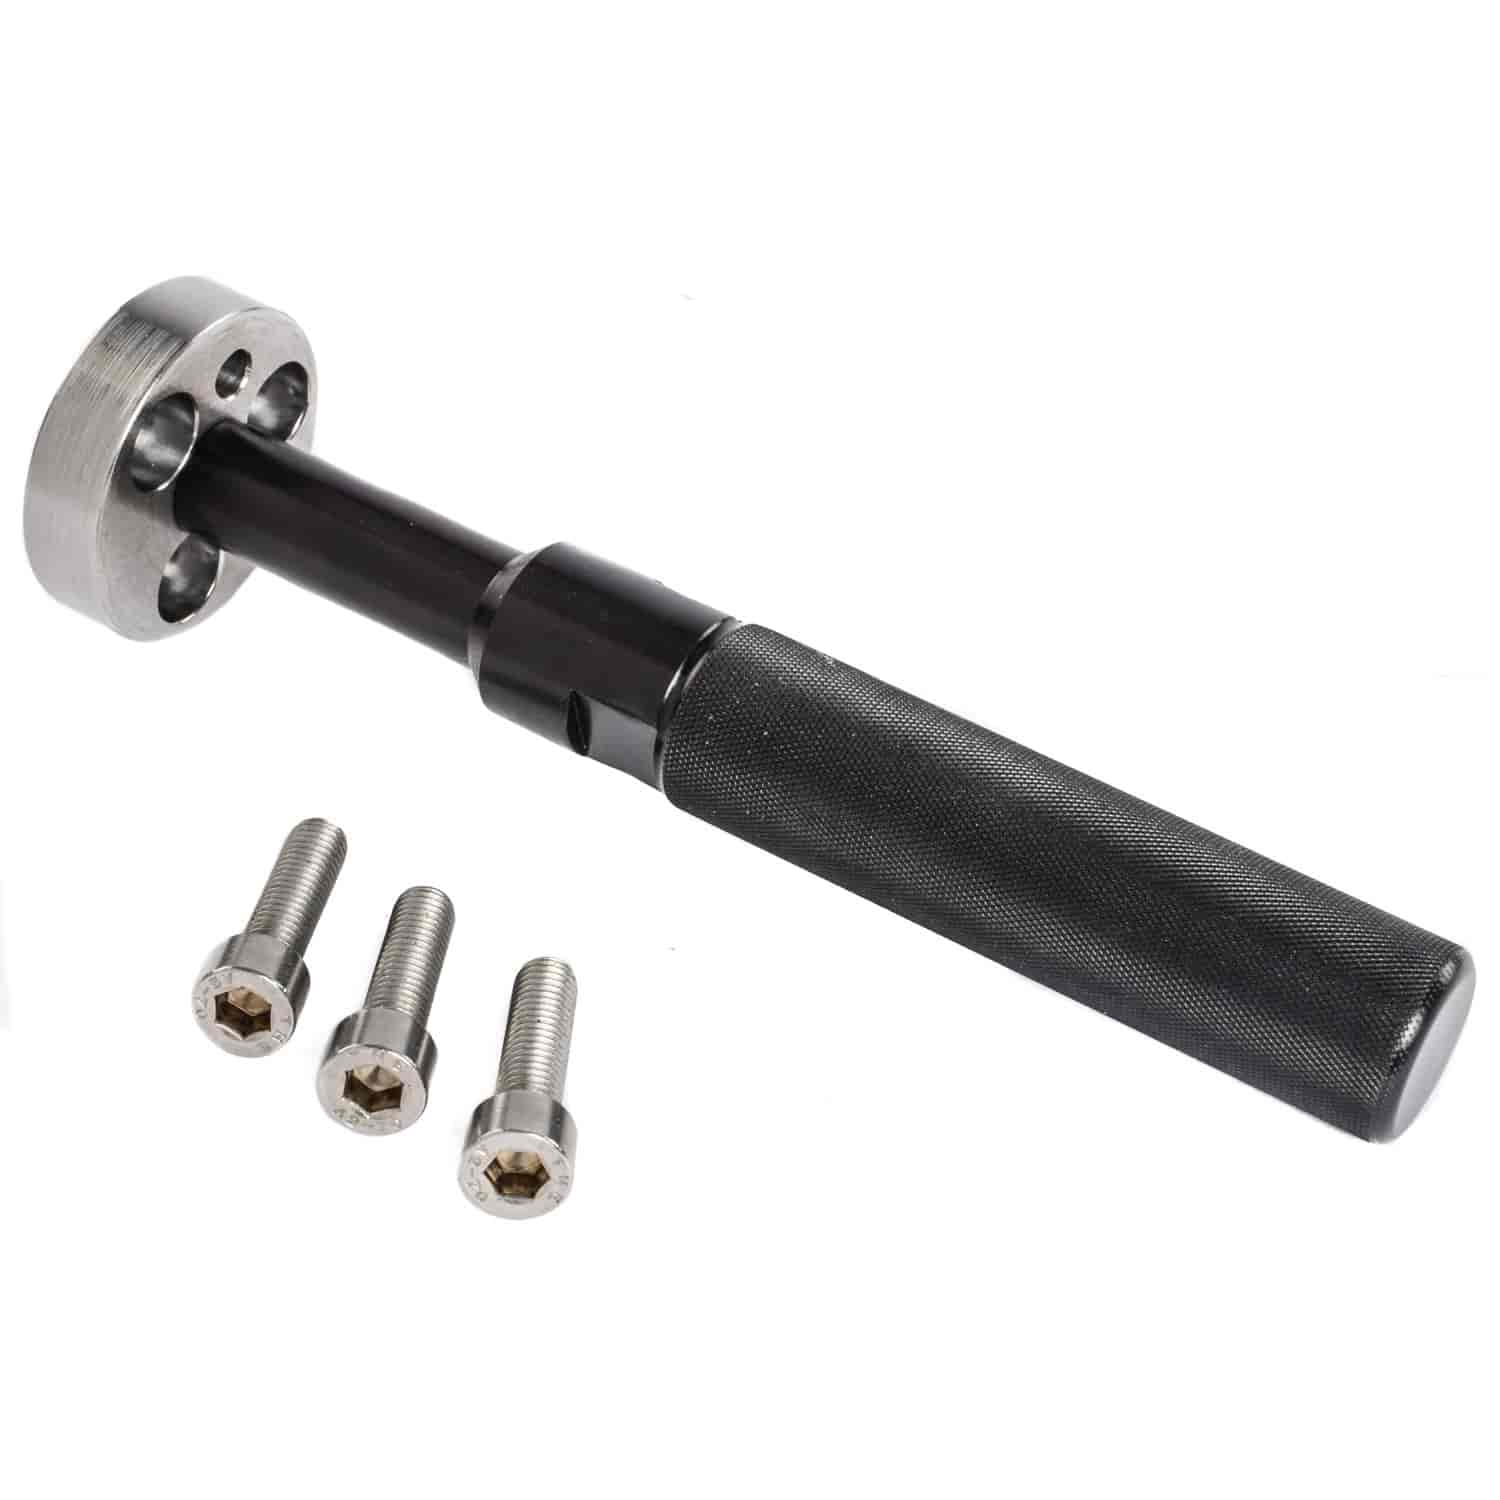 Camshaft Installation/Removal Tool Fits GM LS-Series Engines